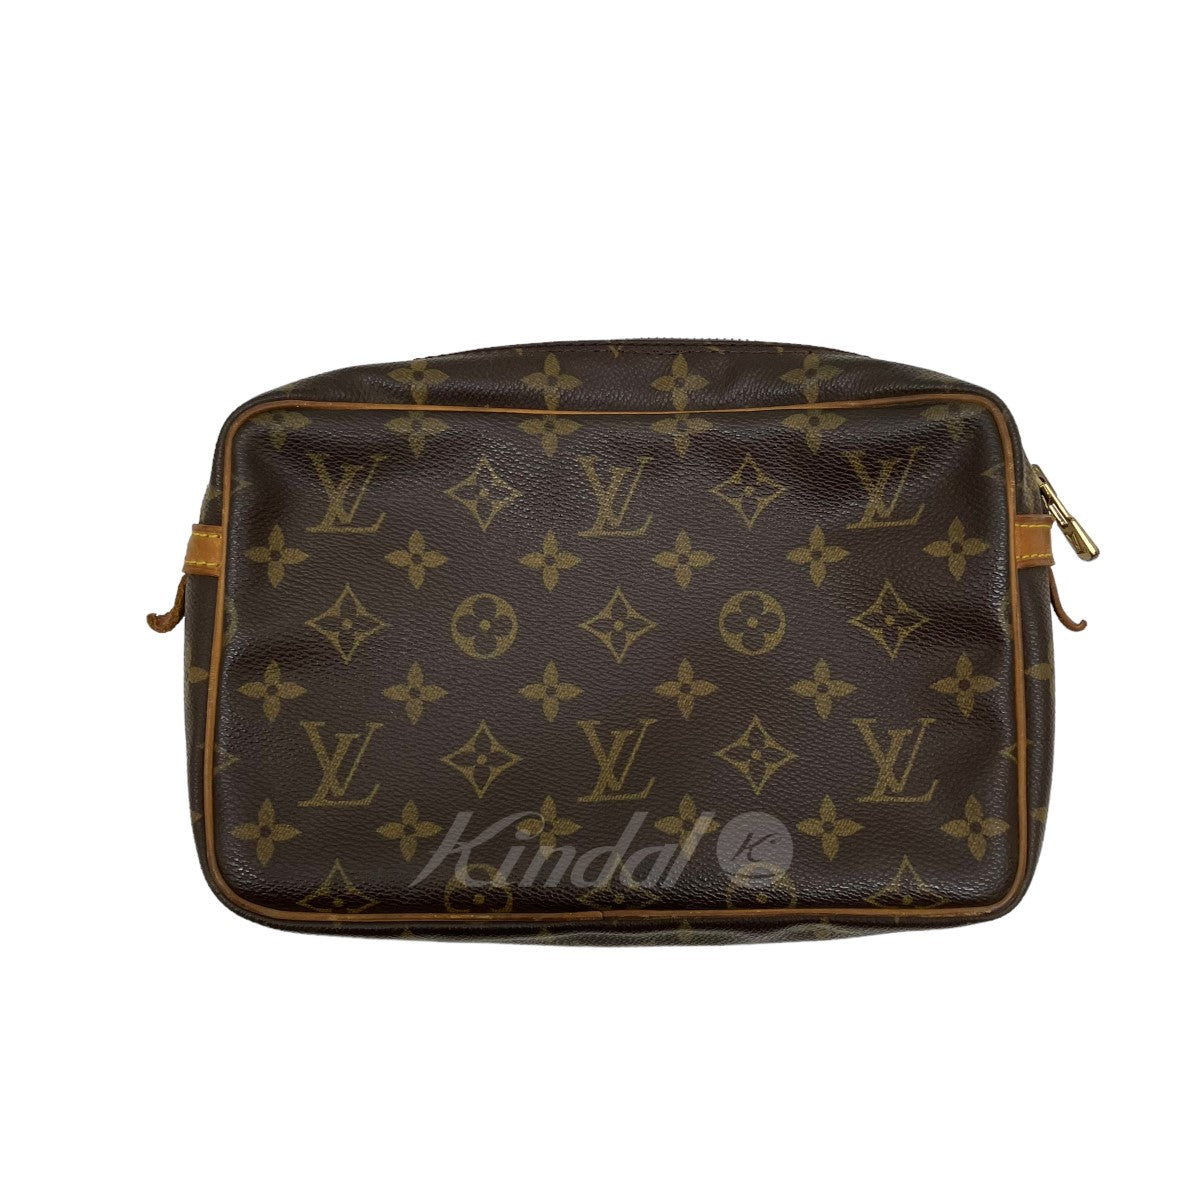 LOUIS VUITTON(ルイヴィトン) コンピエーニュ23 M51847 クラッチバッグ ...